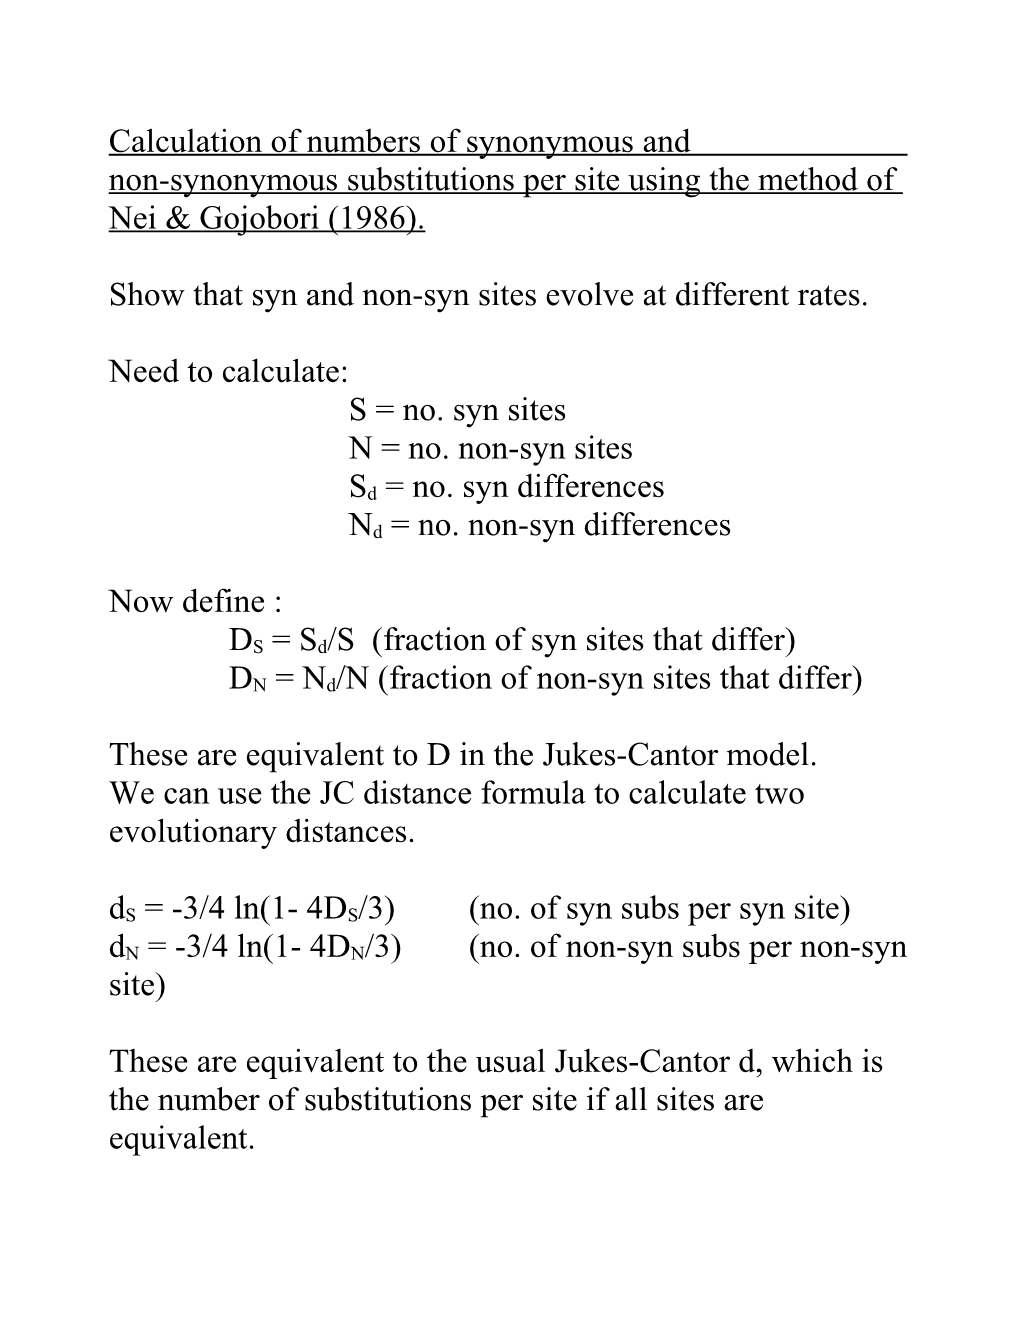 Calculation of Numbers of Synonymous and Non-Synonymous Substitutions Per Site Using The